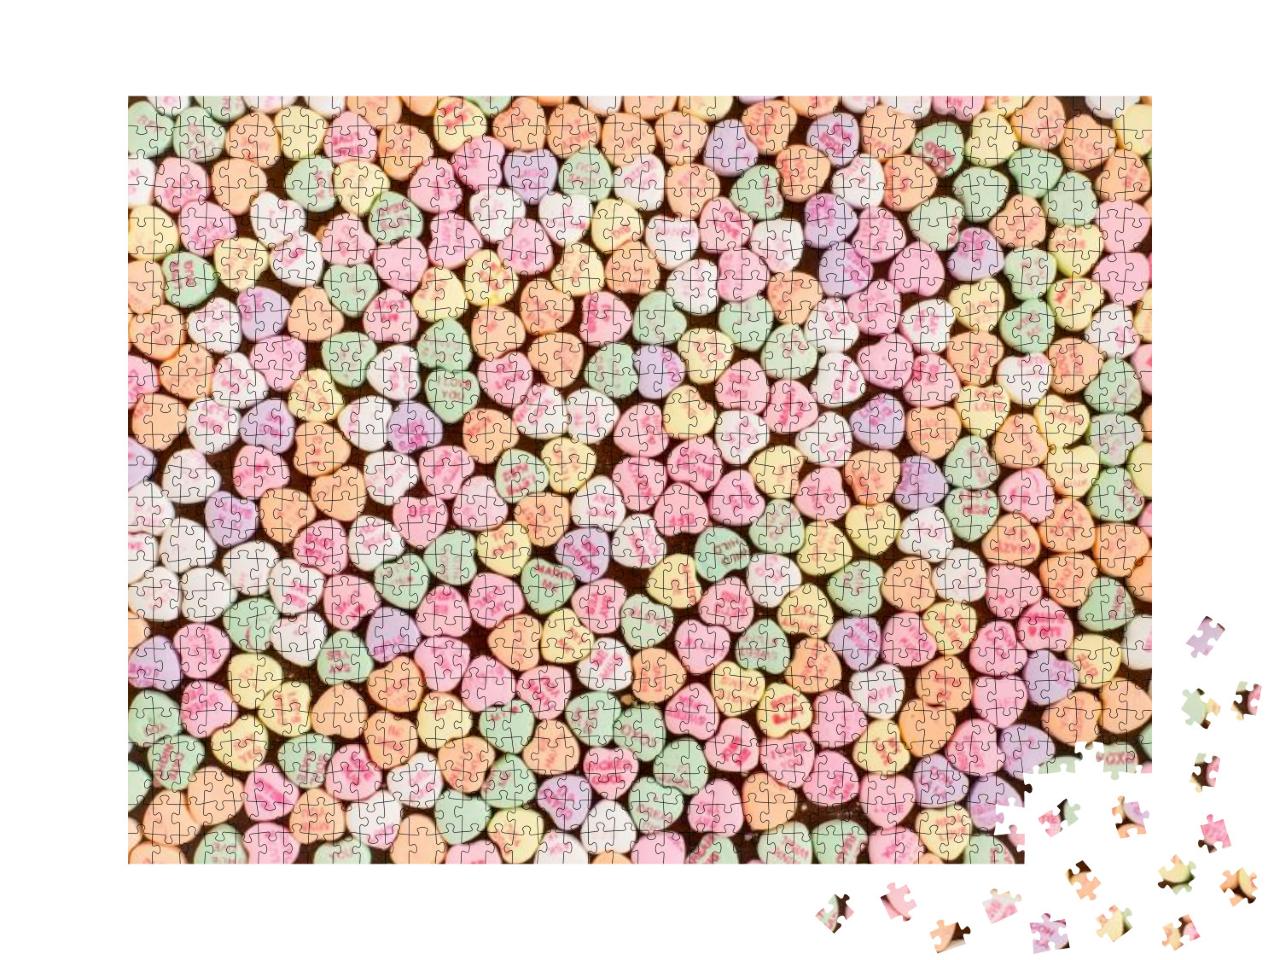 Background of Valentine Conversation Heart Candies... Jigsaw Puzzle with 1000 pieces